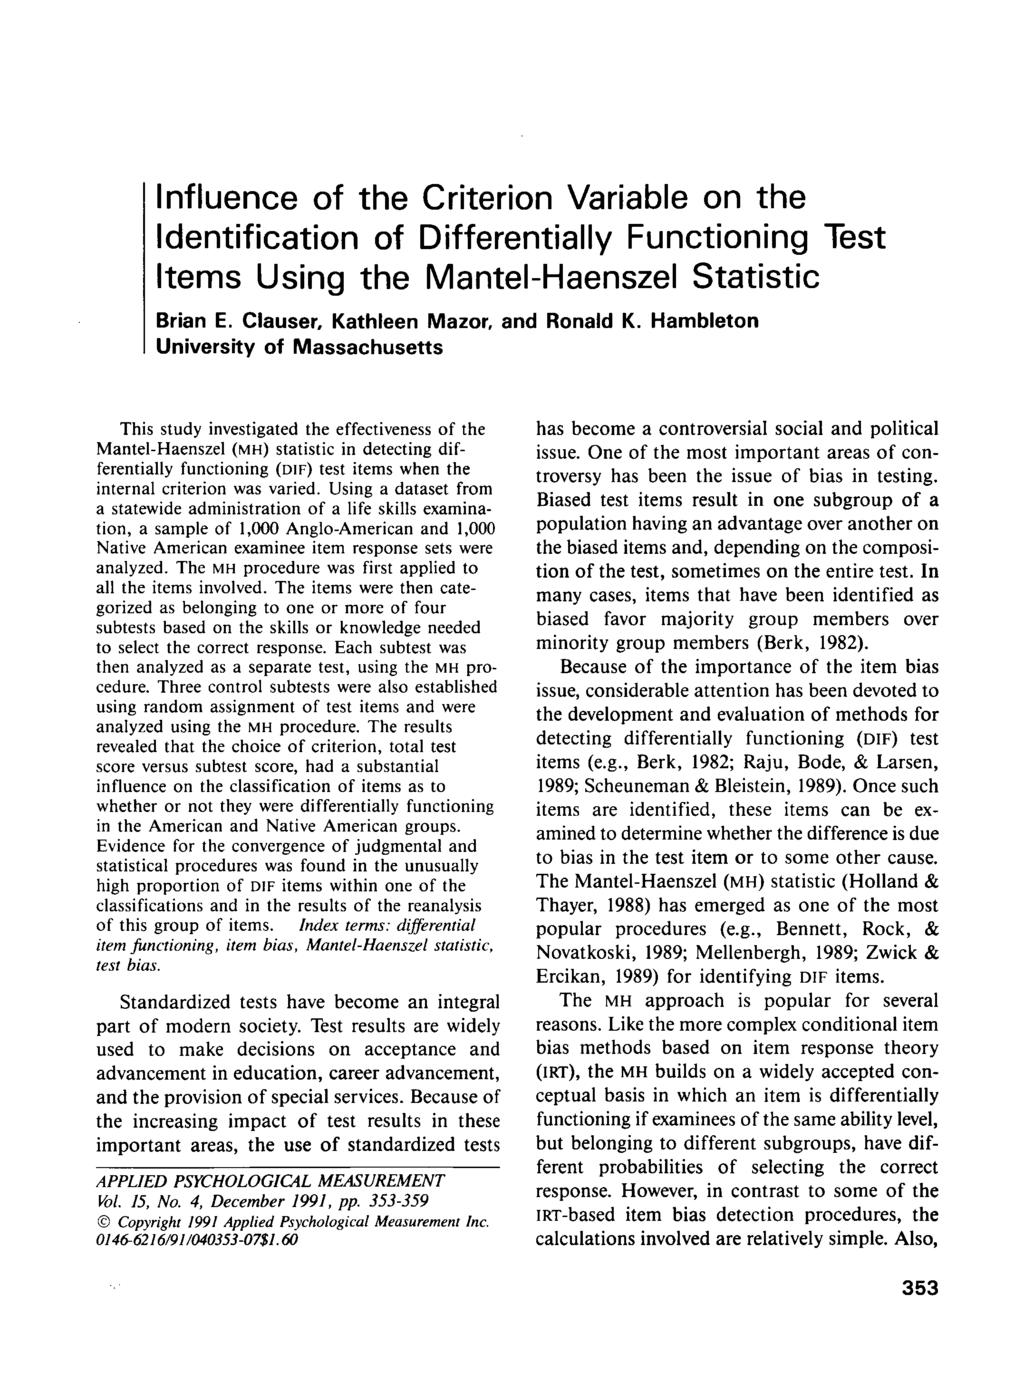 Influence of the Criterion Variable on the Identification of Differentially Functioning Test Items Using the Mantel-Haenszel Statistic Brian E. Clauser, Kathleen Mazor, and Ronald K.